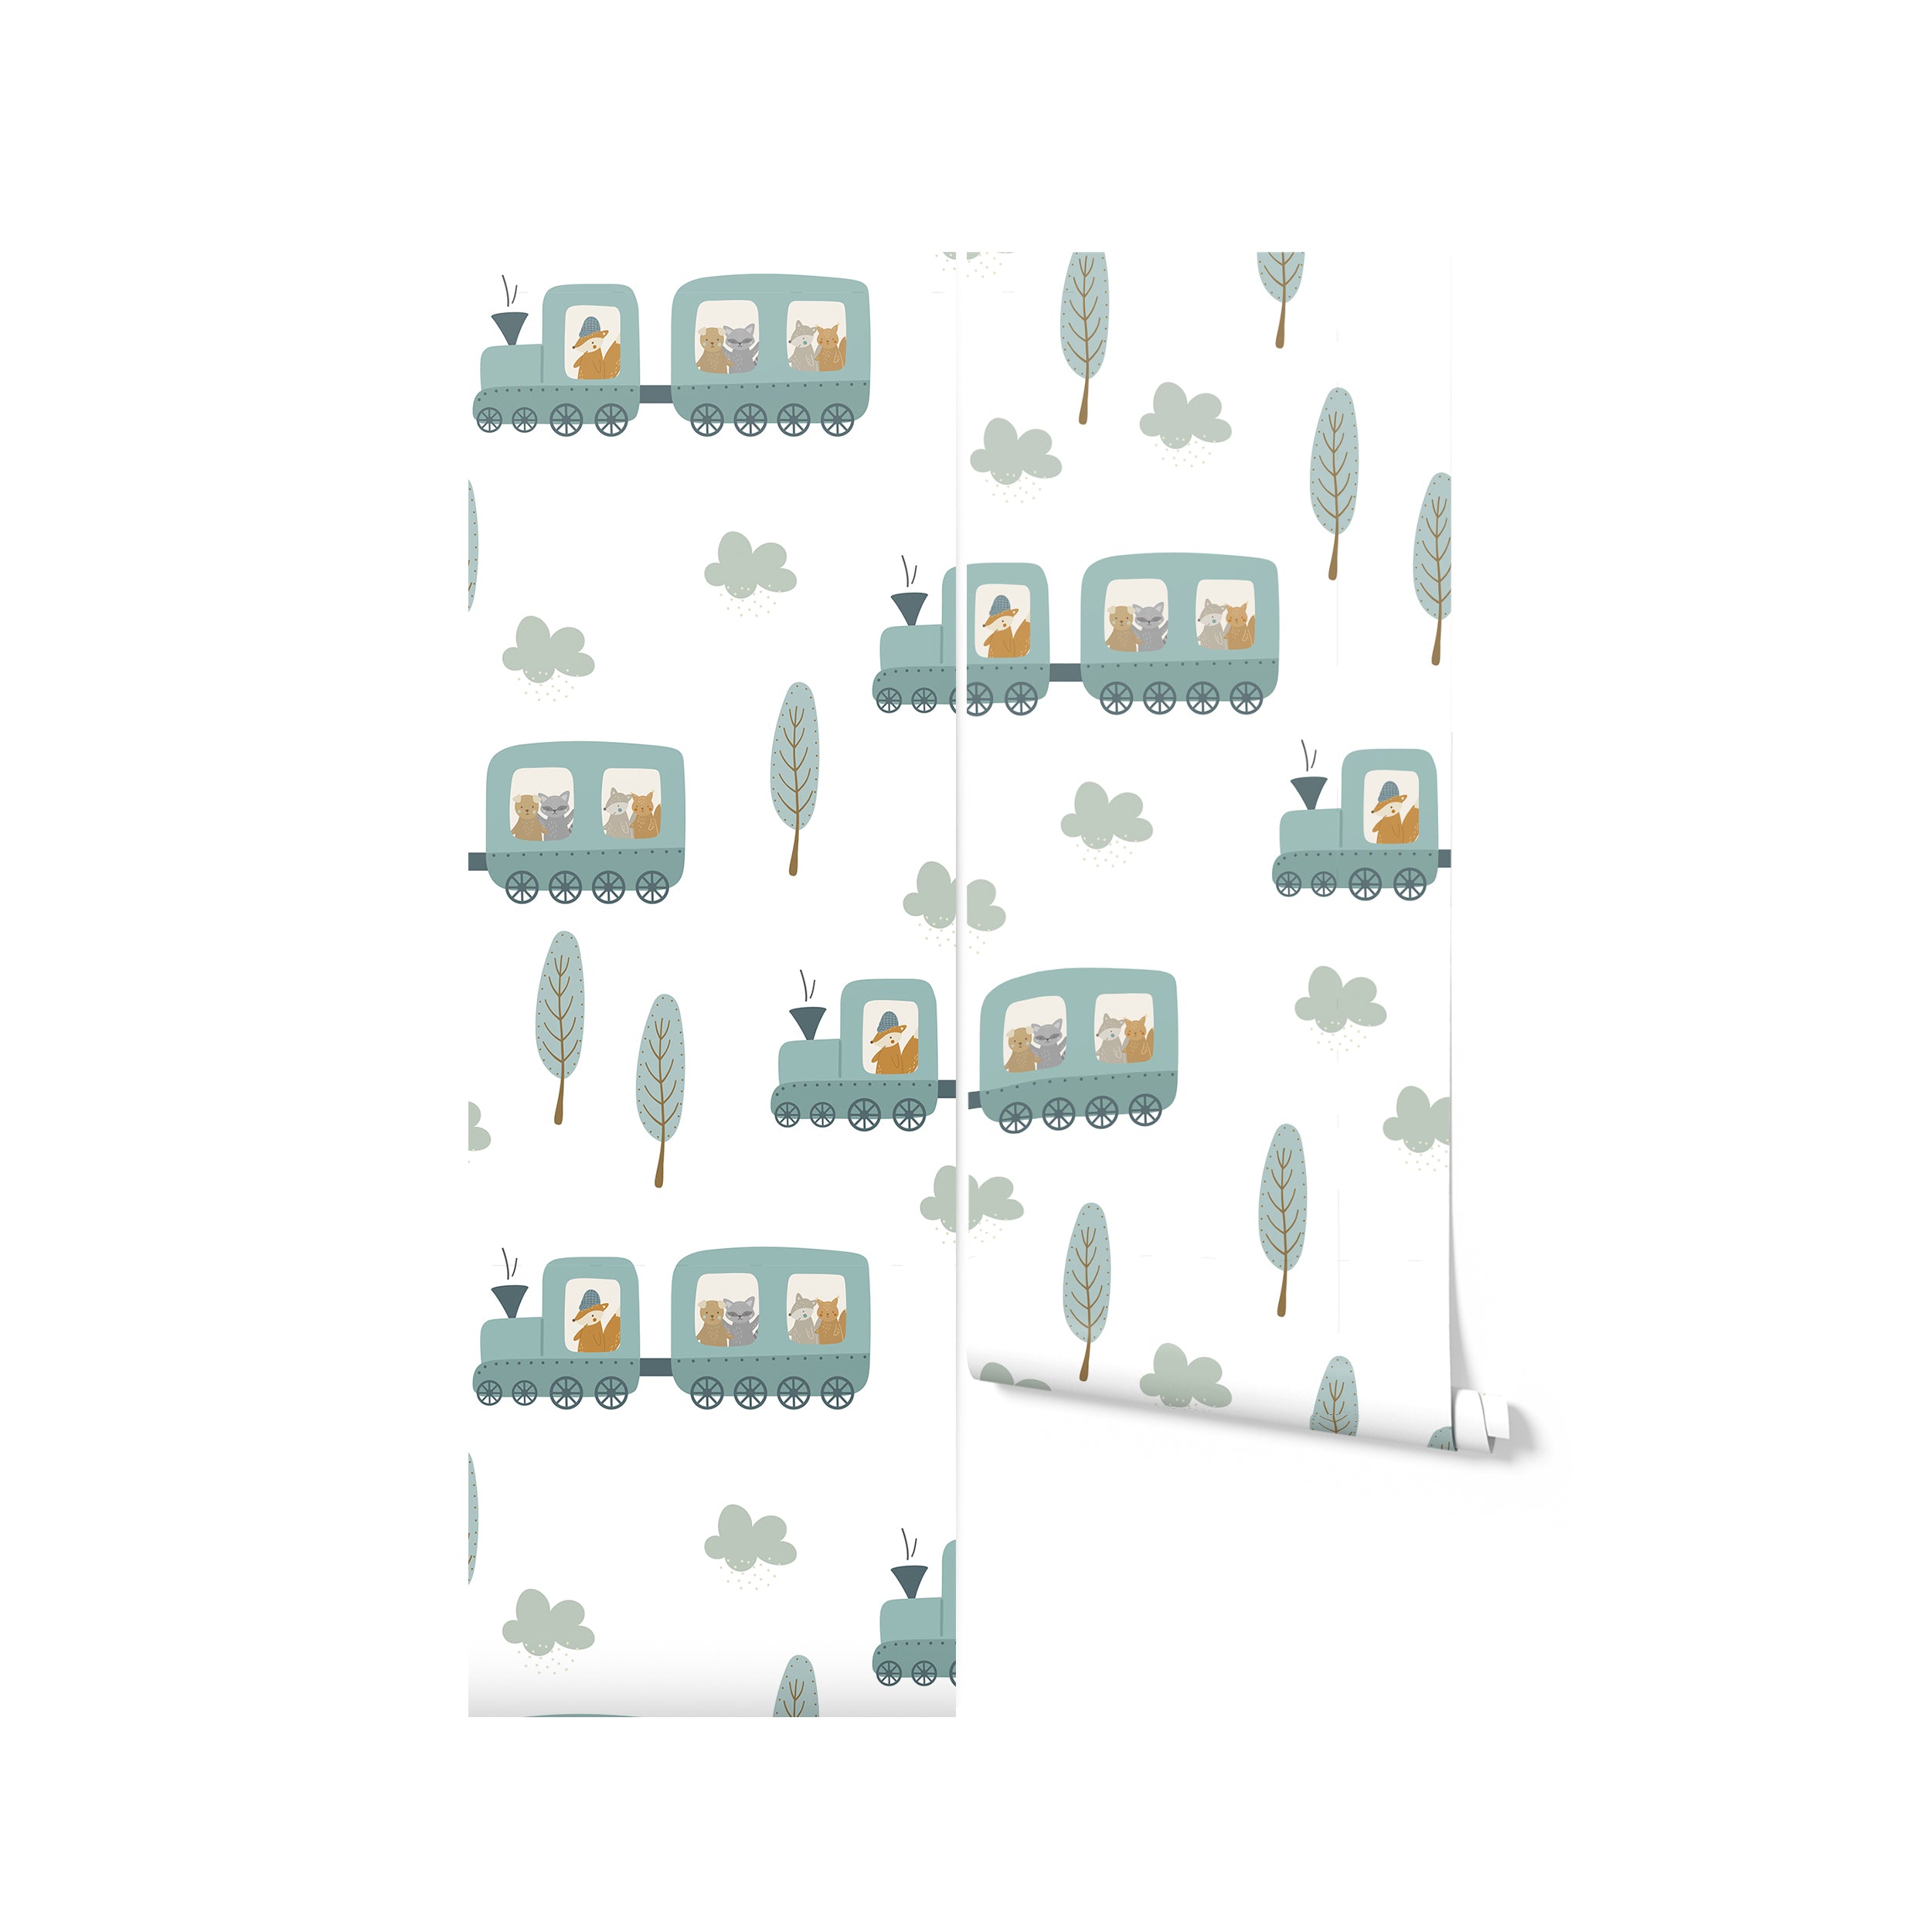 A depiction of the All Aboard Wallpaper as it might appear when unrolled, showing the continuous pattern of adorable animals in train carts, surrounded by trees and clouds. The design's soft color palette and endearing motifs are perfect for adding a whimsical touch to any child's space.